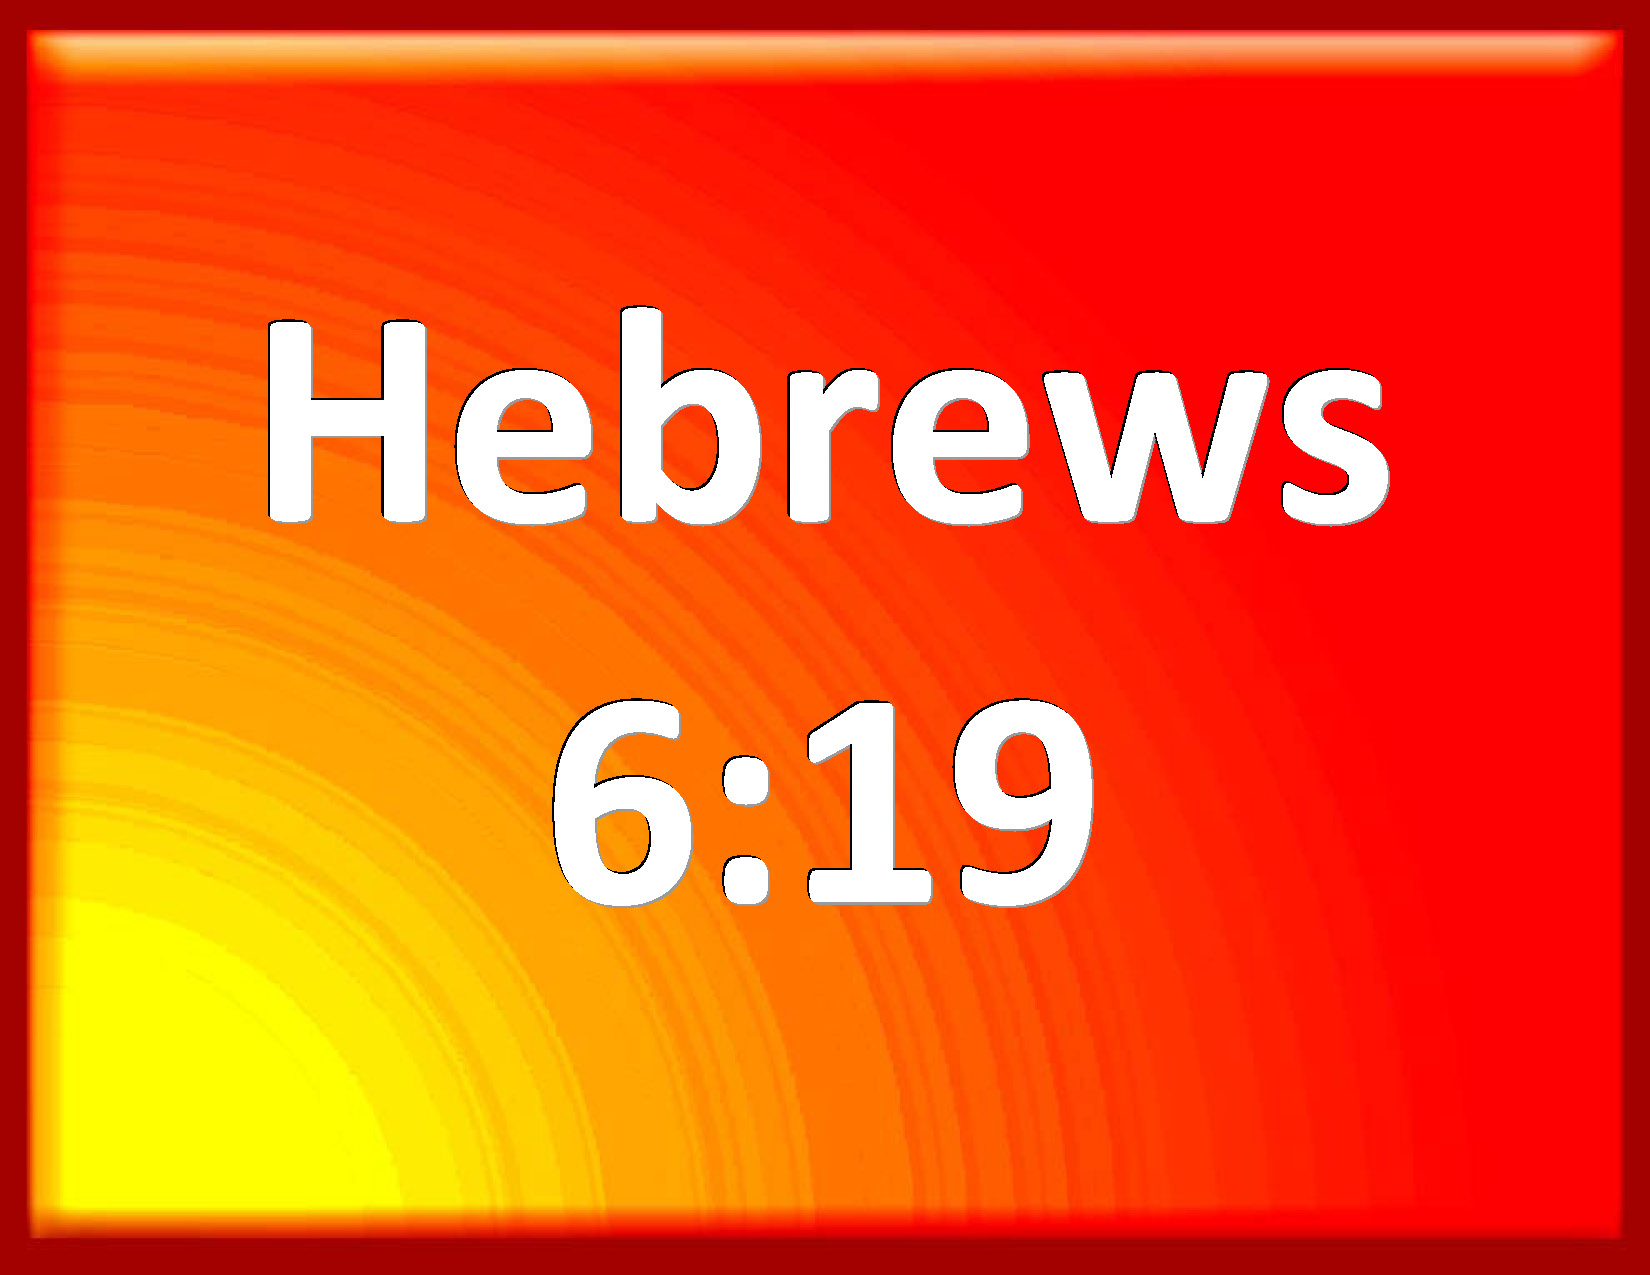 Hebrews 6:19 Which hope we have as an anchor of the soul, both sure and ...